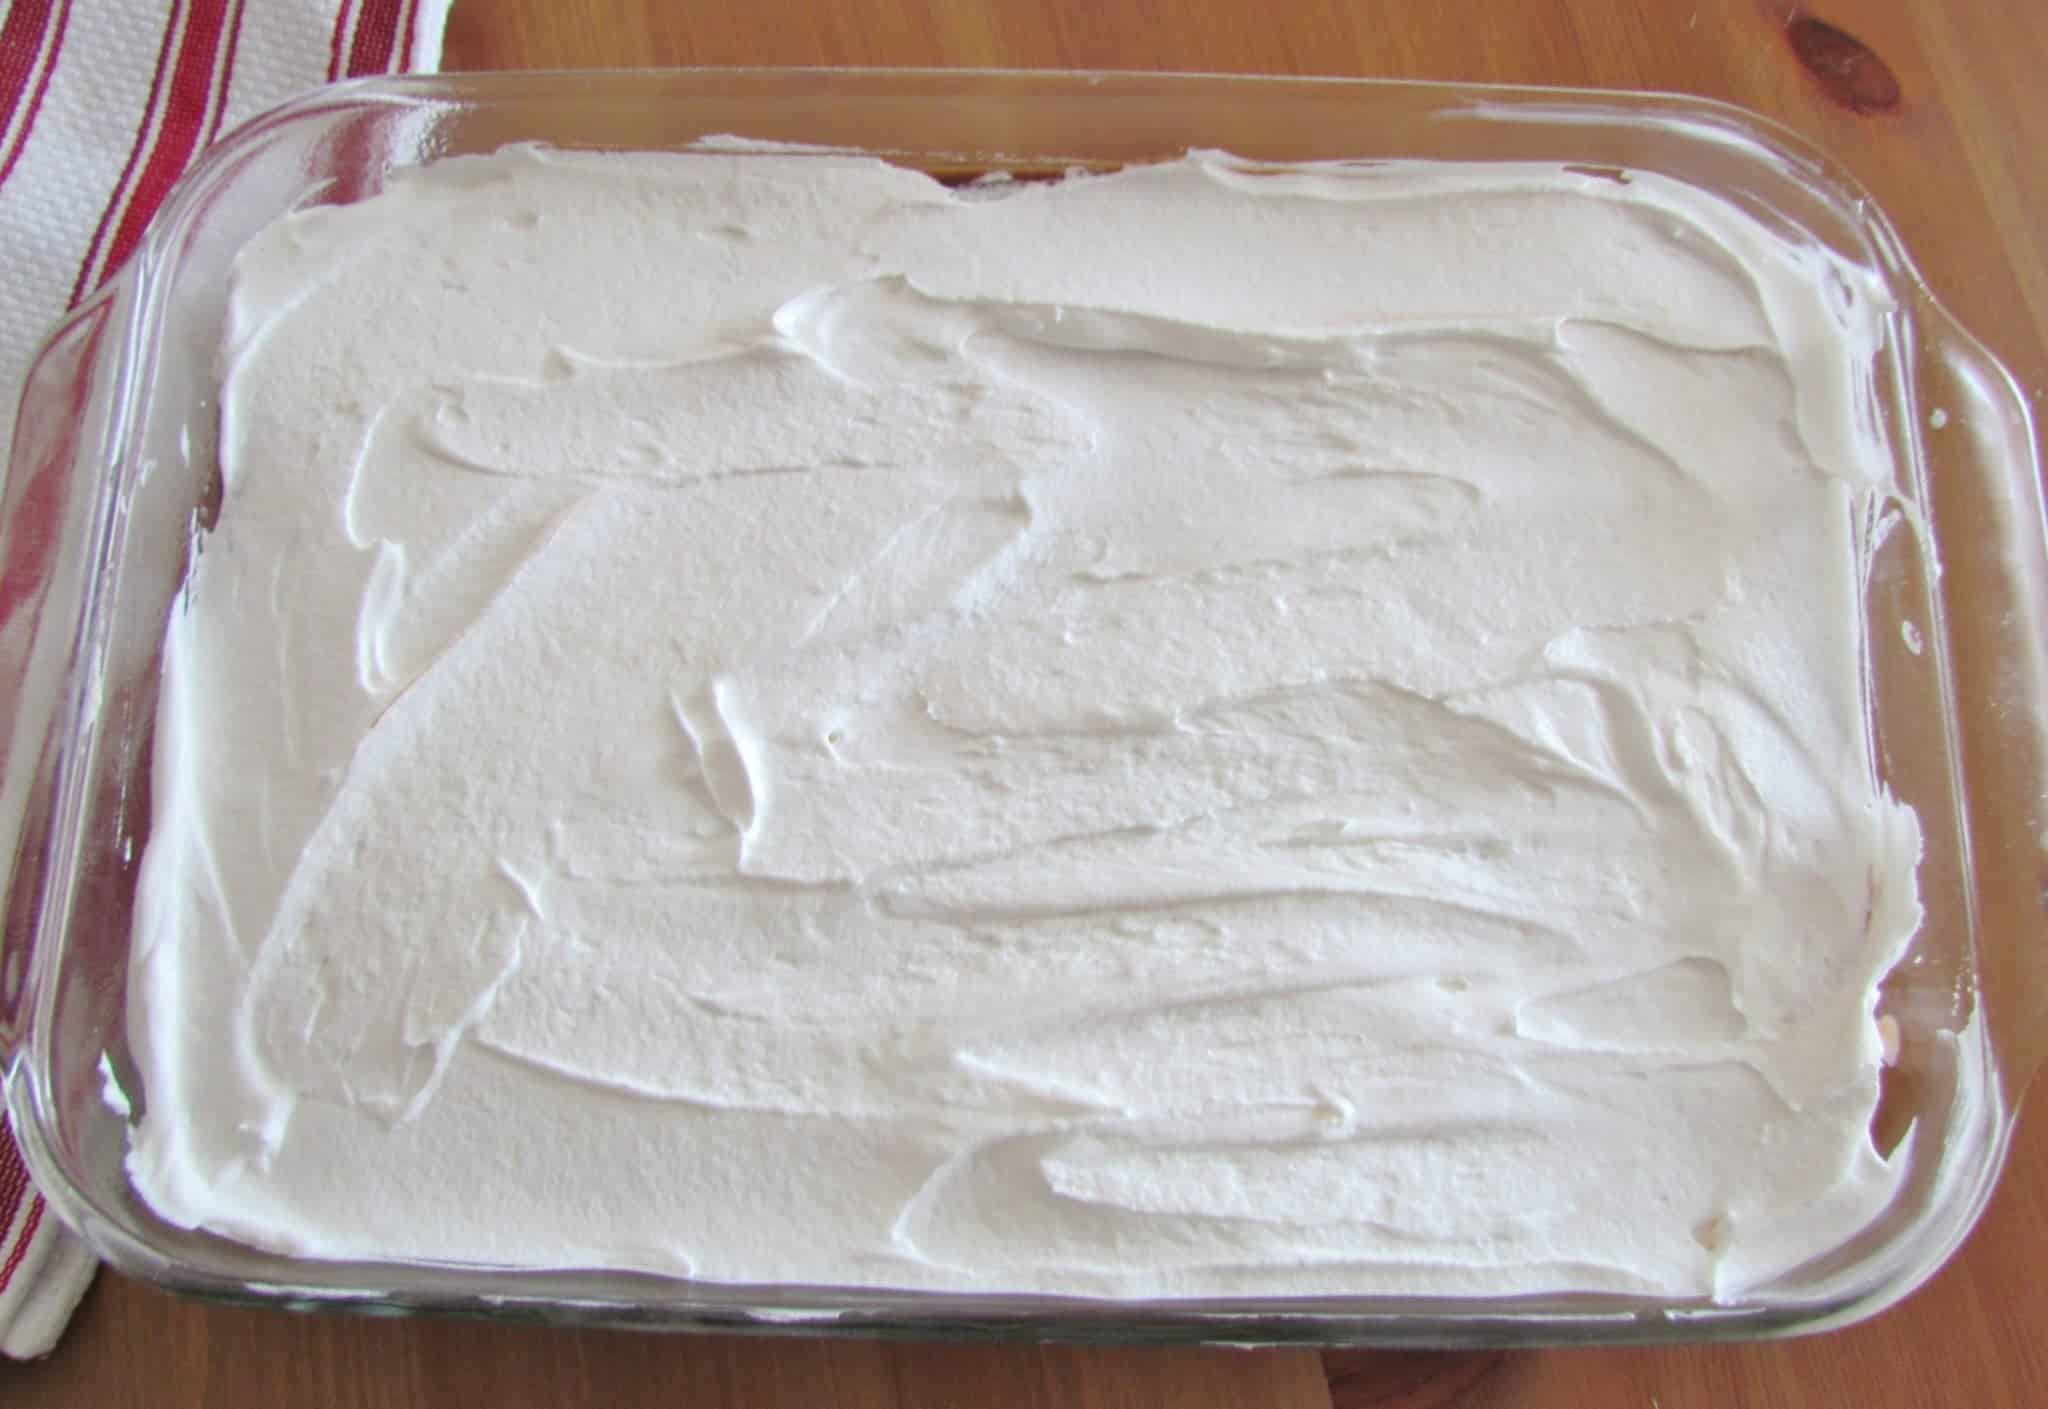 Cool Whip whipped topping spread on top of layered dessert.